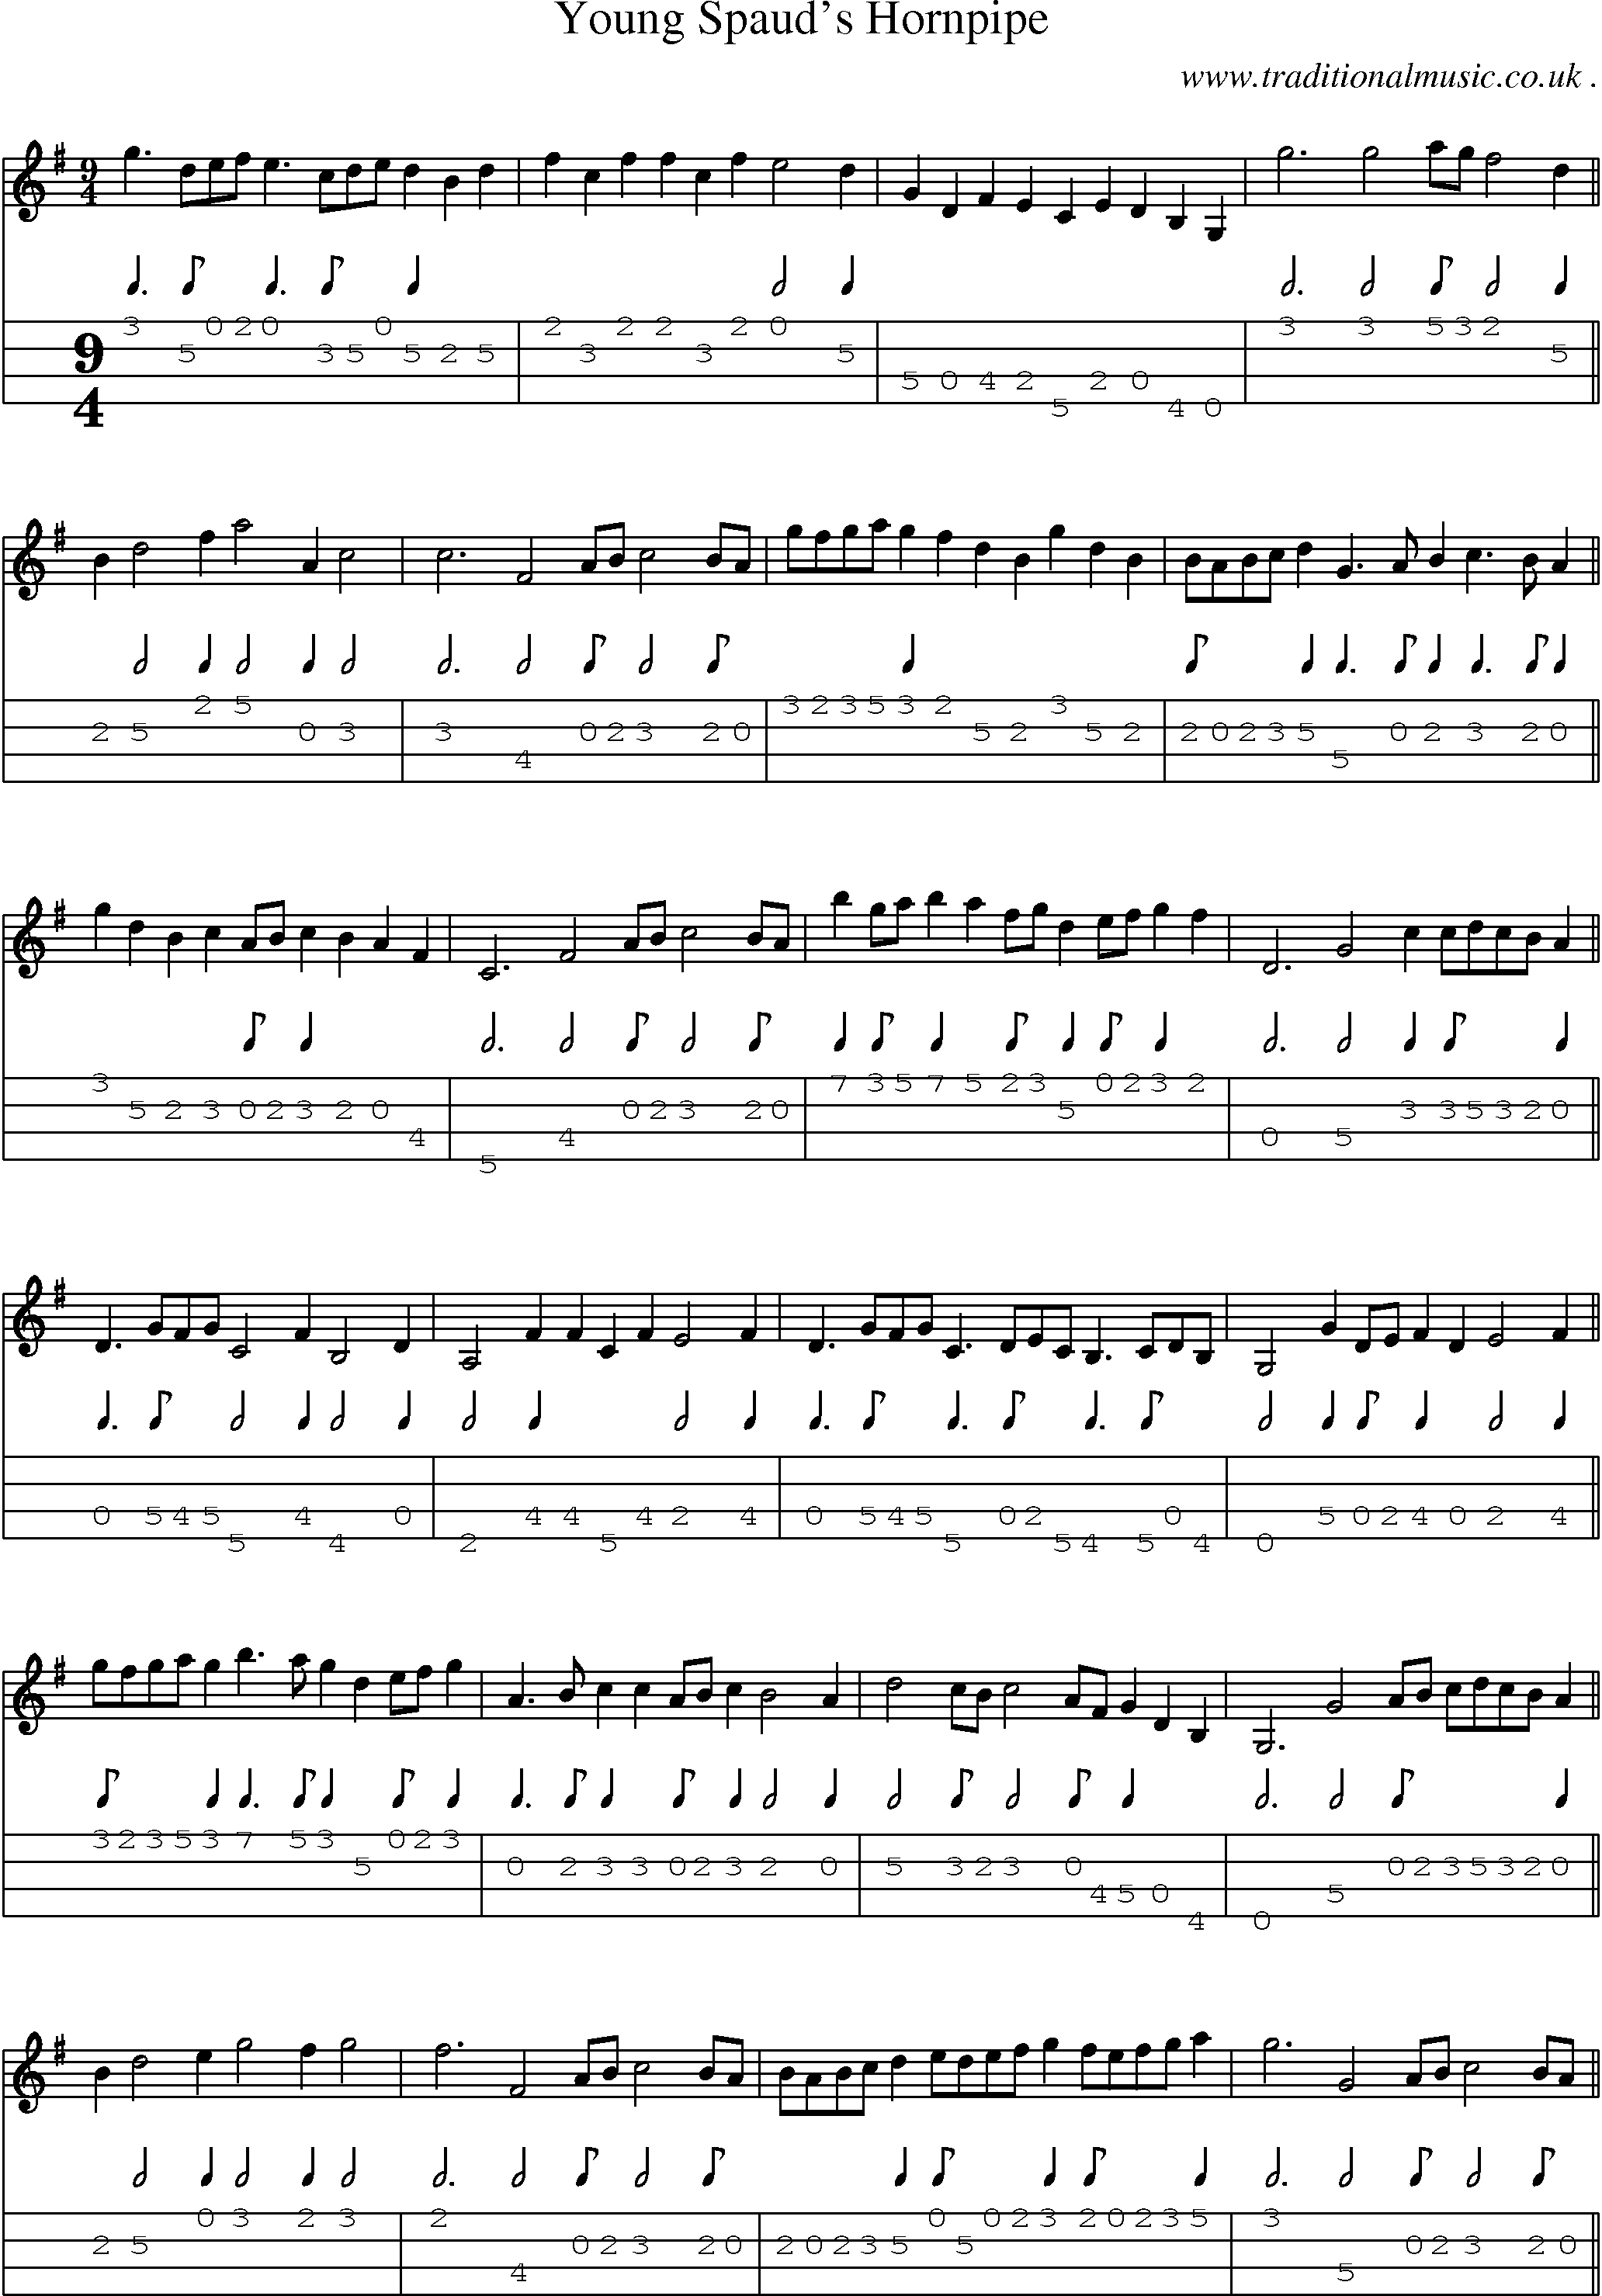 Sheet-Music and Mandolin Tabs for Young Spauds Hornpipe